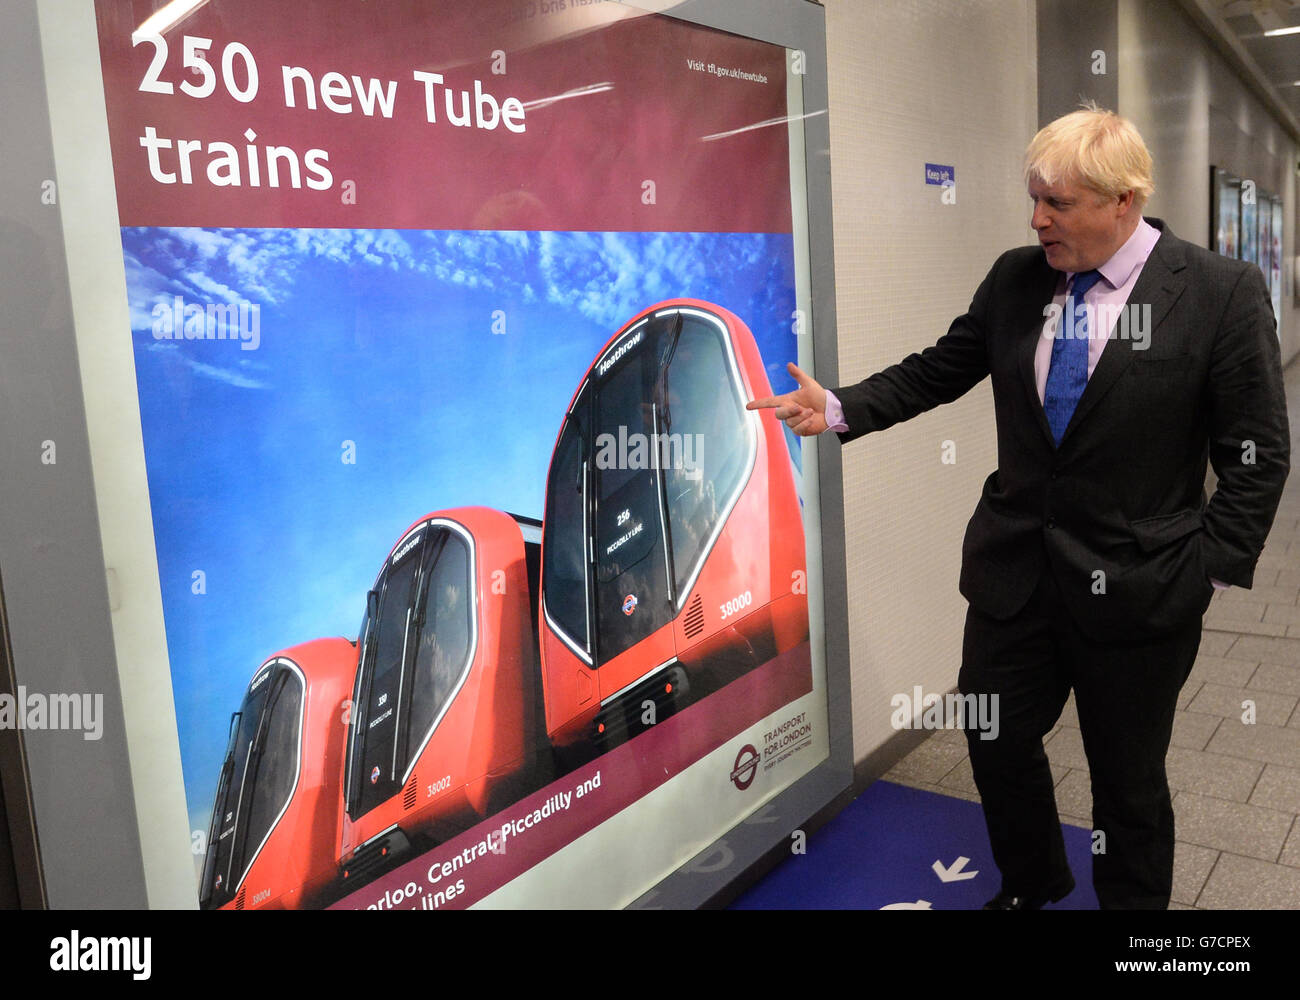 Mayor of London Boris Johnson attends the unveiling at King's Cross Station of the designs for the next generation of tube train that will come into service in the mid 2020s, the new trains will be introduced firstly on the Piccadilly Line, followed by the Bakerloo, Central and Waterloo and City Lines. Stock Photo